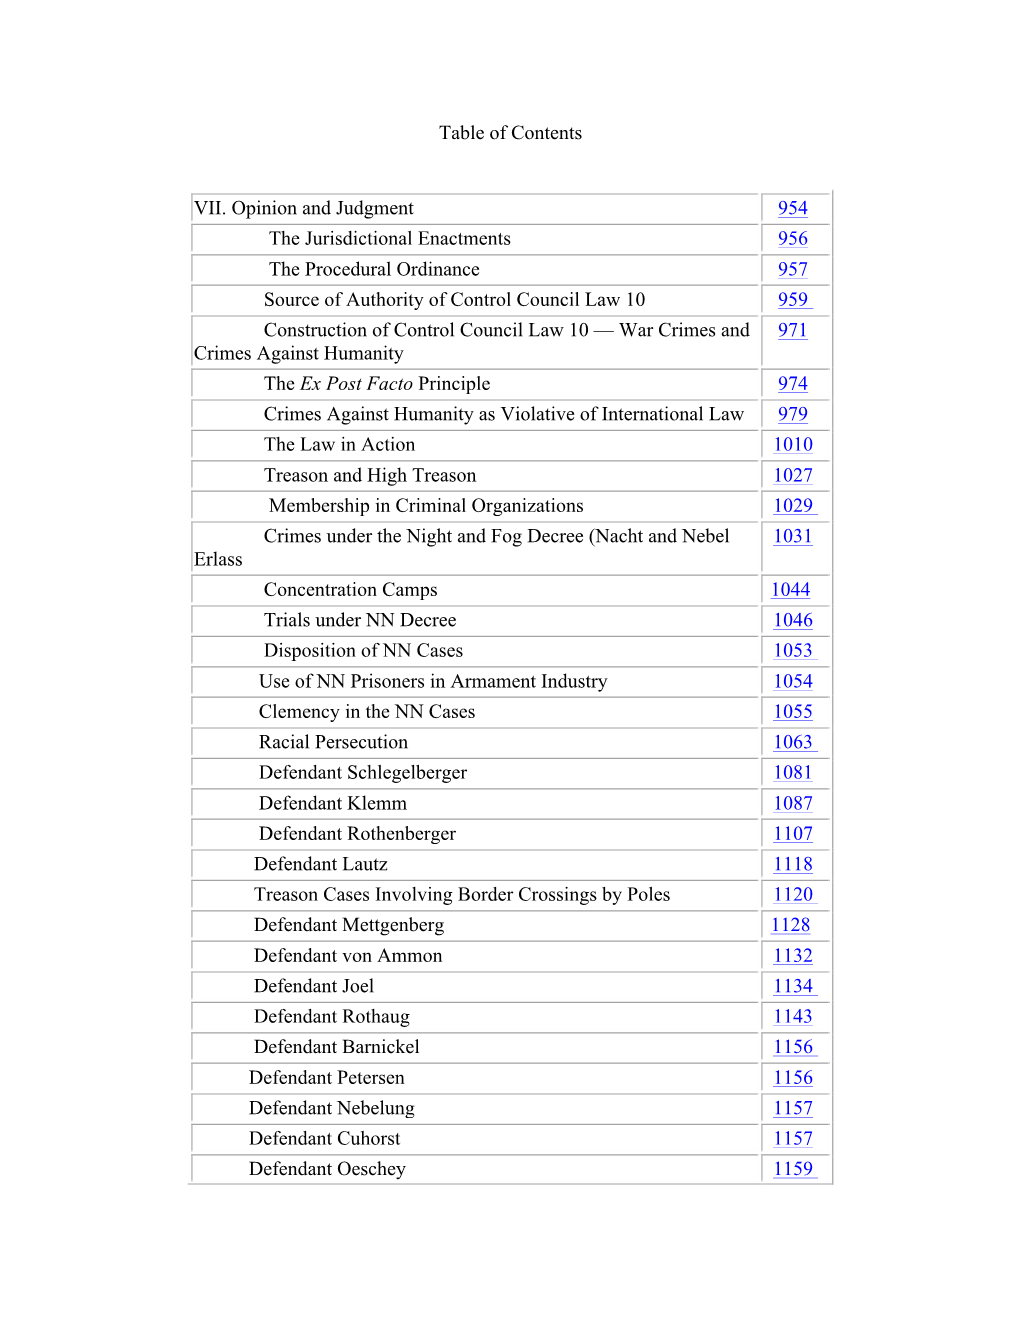 Table of Contents VII. Opinion and Judgment 954 the Jurisdictional